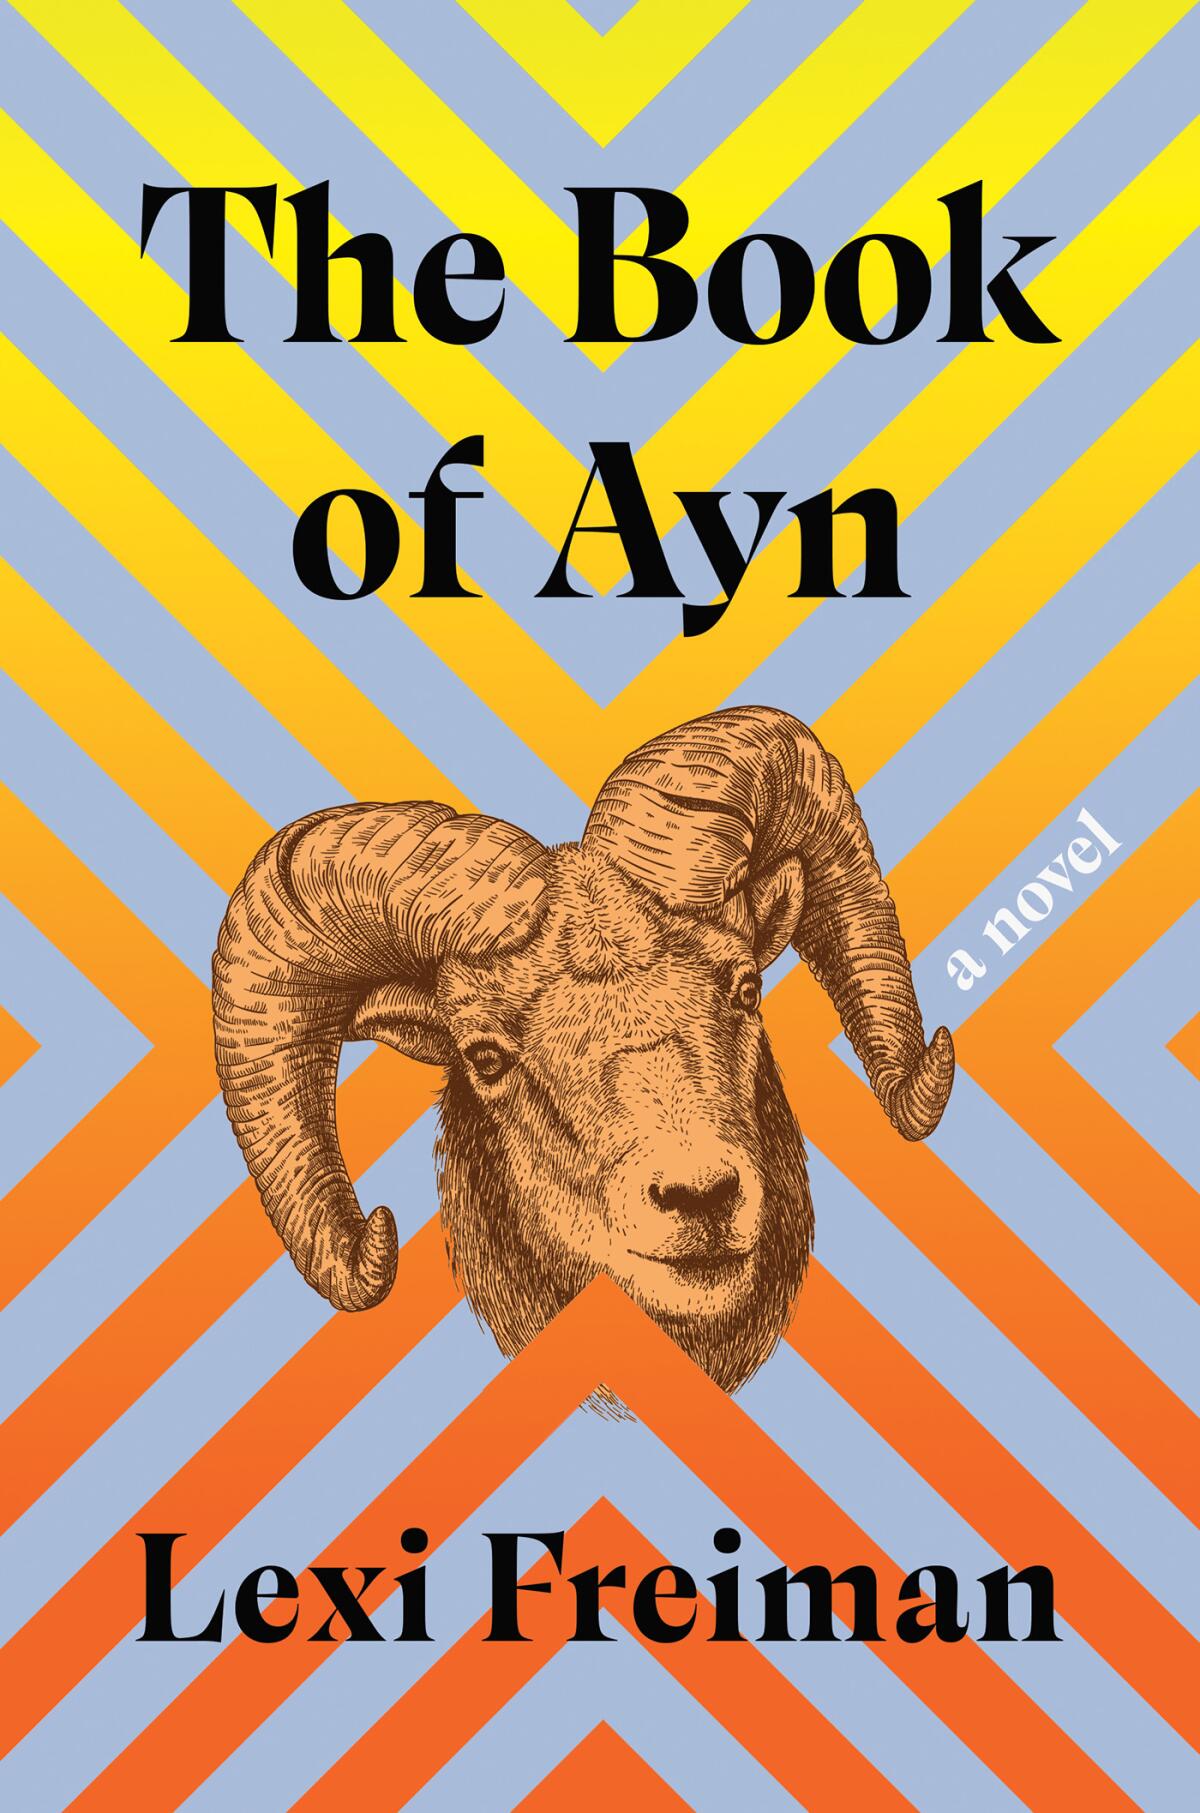 "The Book of Ayn," by Lexi Freiman